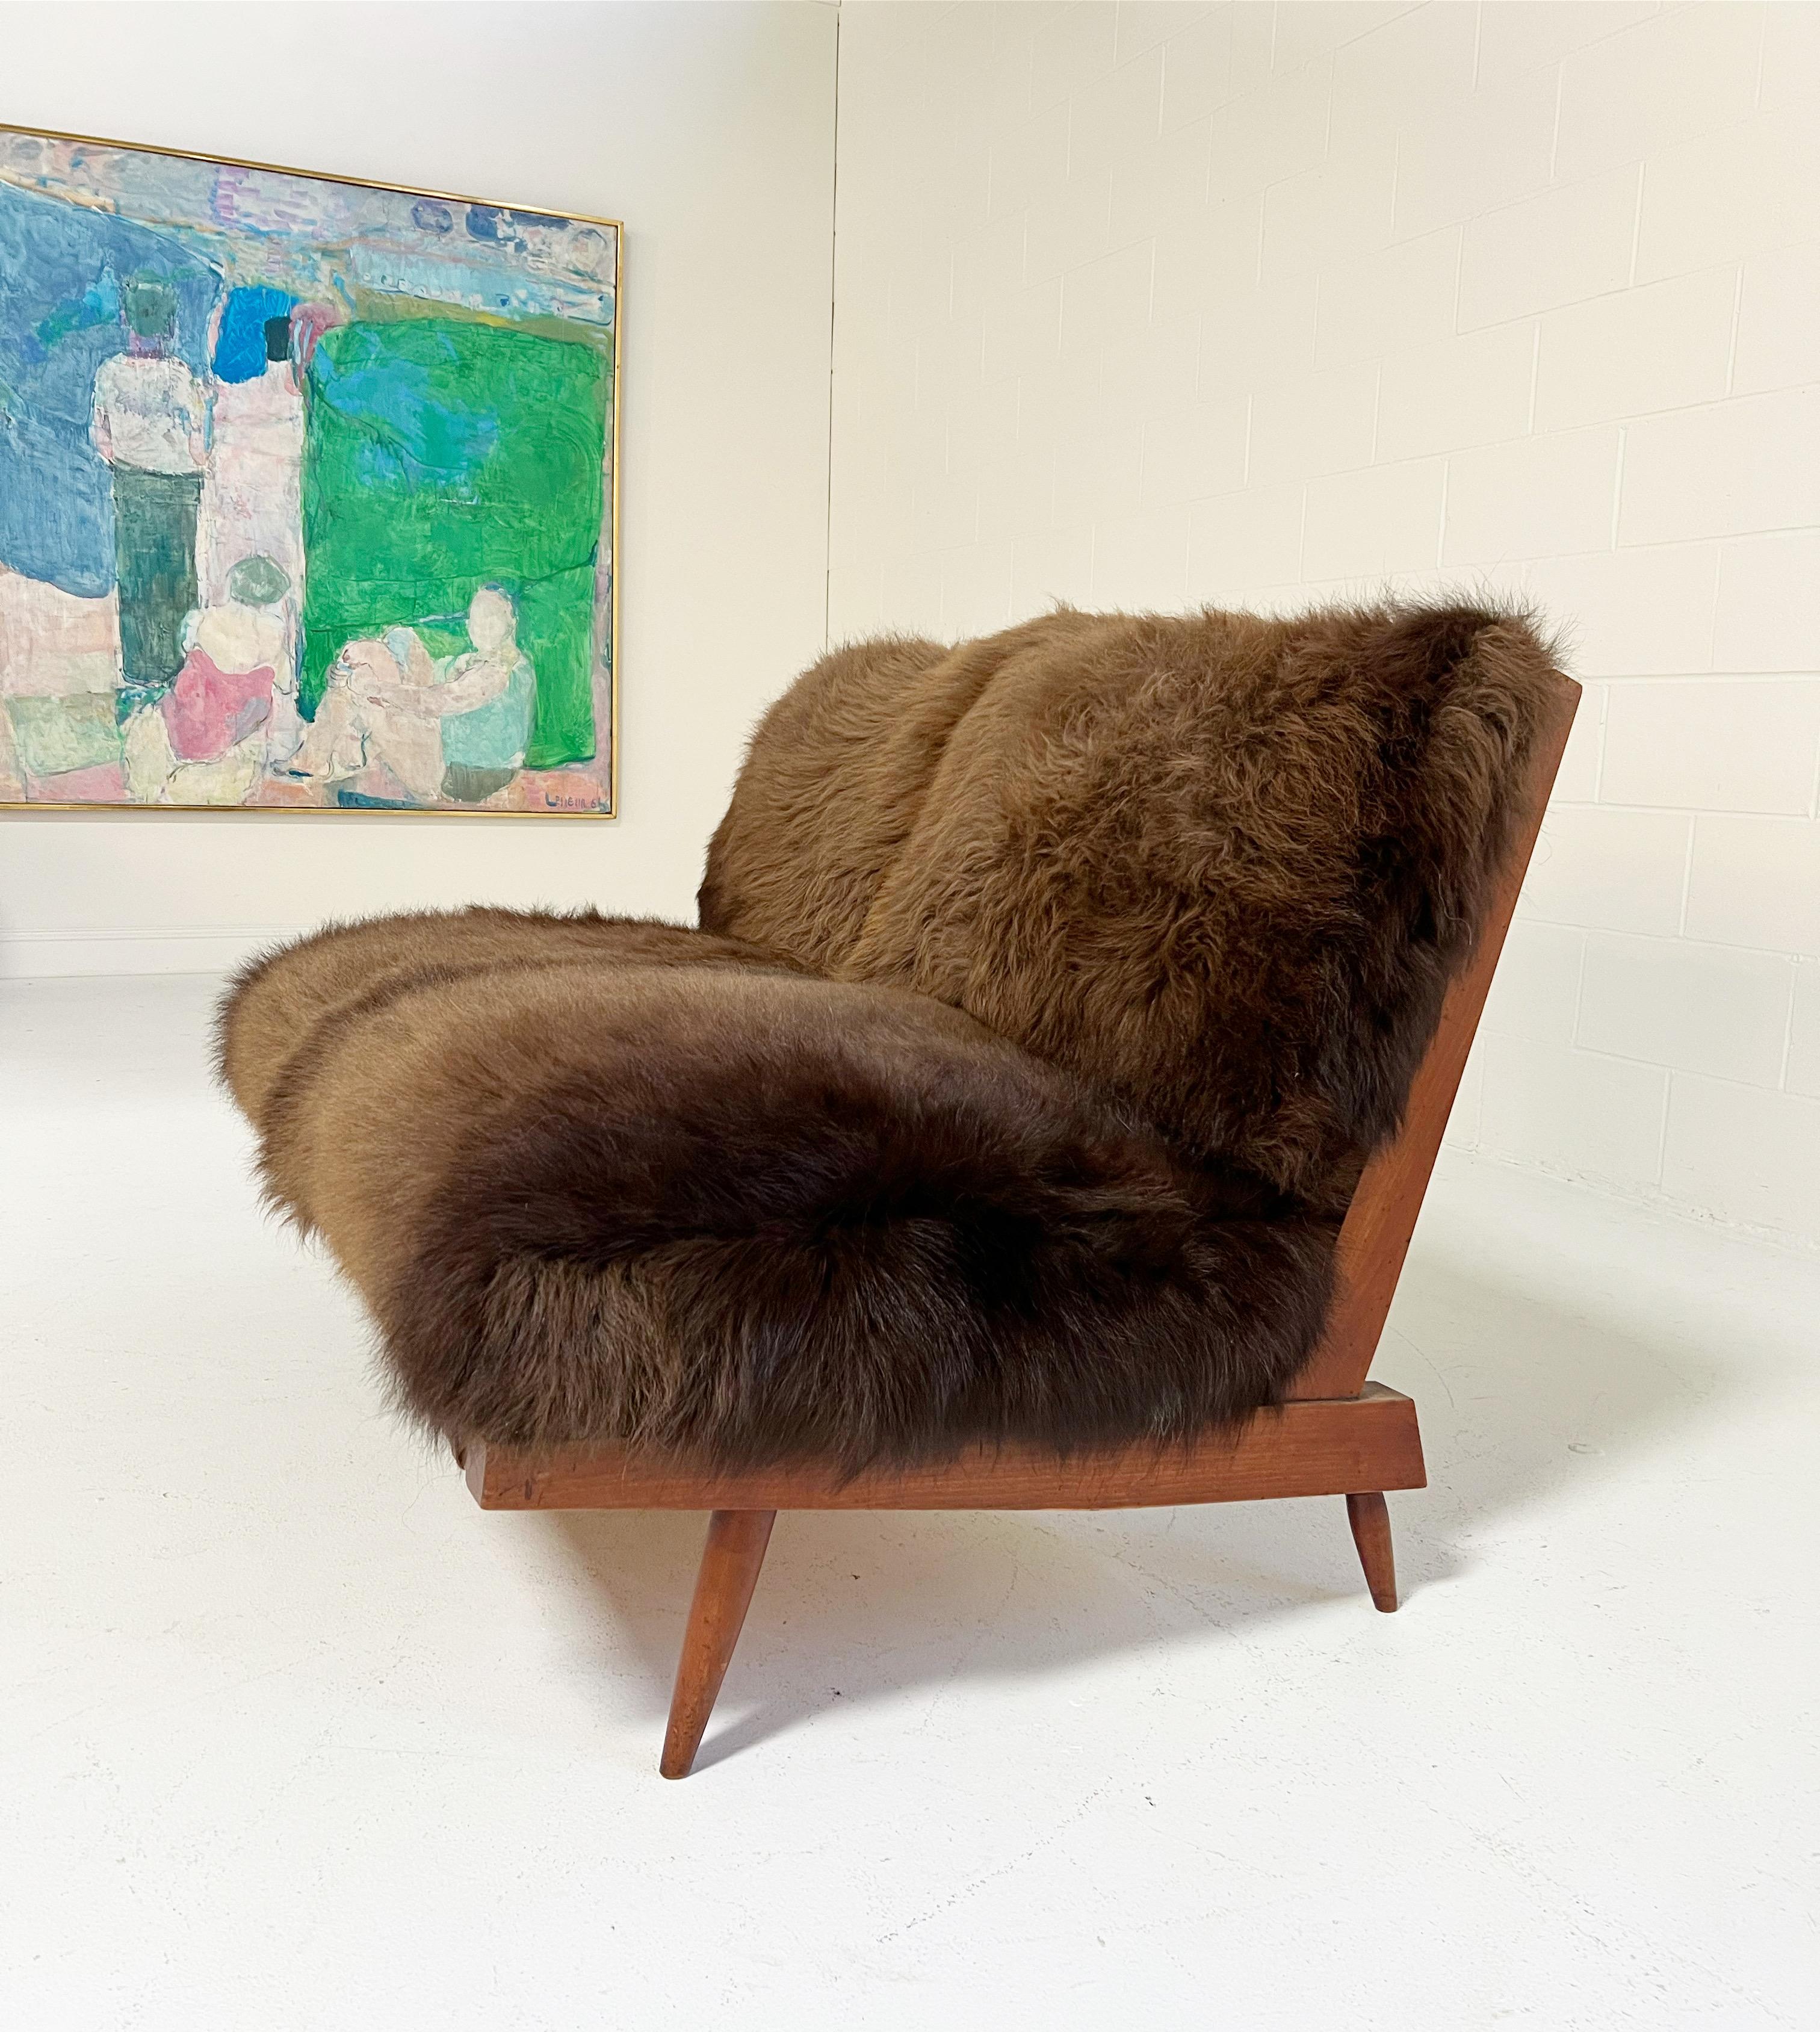 Nakashima's settee is a design lover's dream. Simple wood craftmanship at its finest. The cushions are custom and crafted of thick and soft bison hide. Each is generously filled with feathers for a most comfortable seat. We love how the chocolate